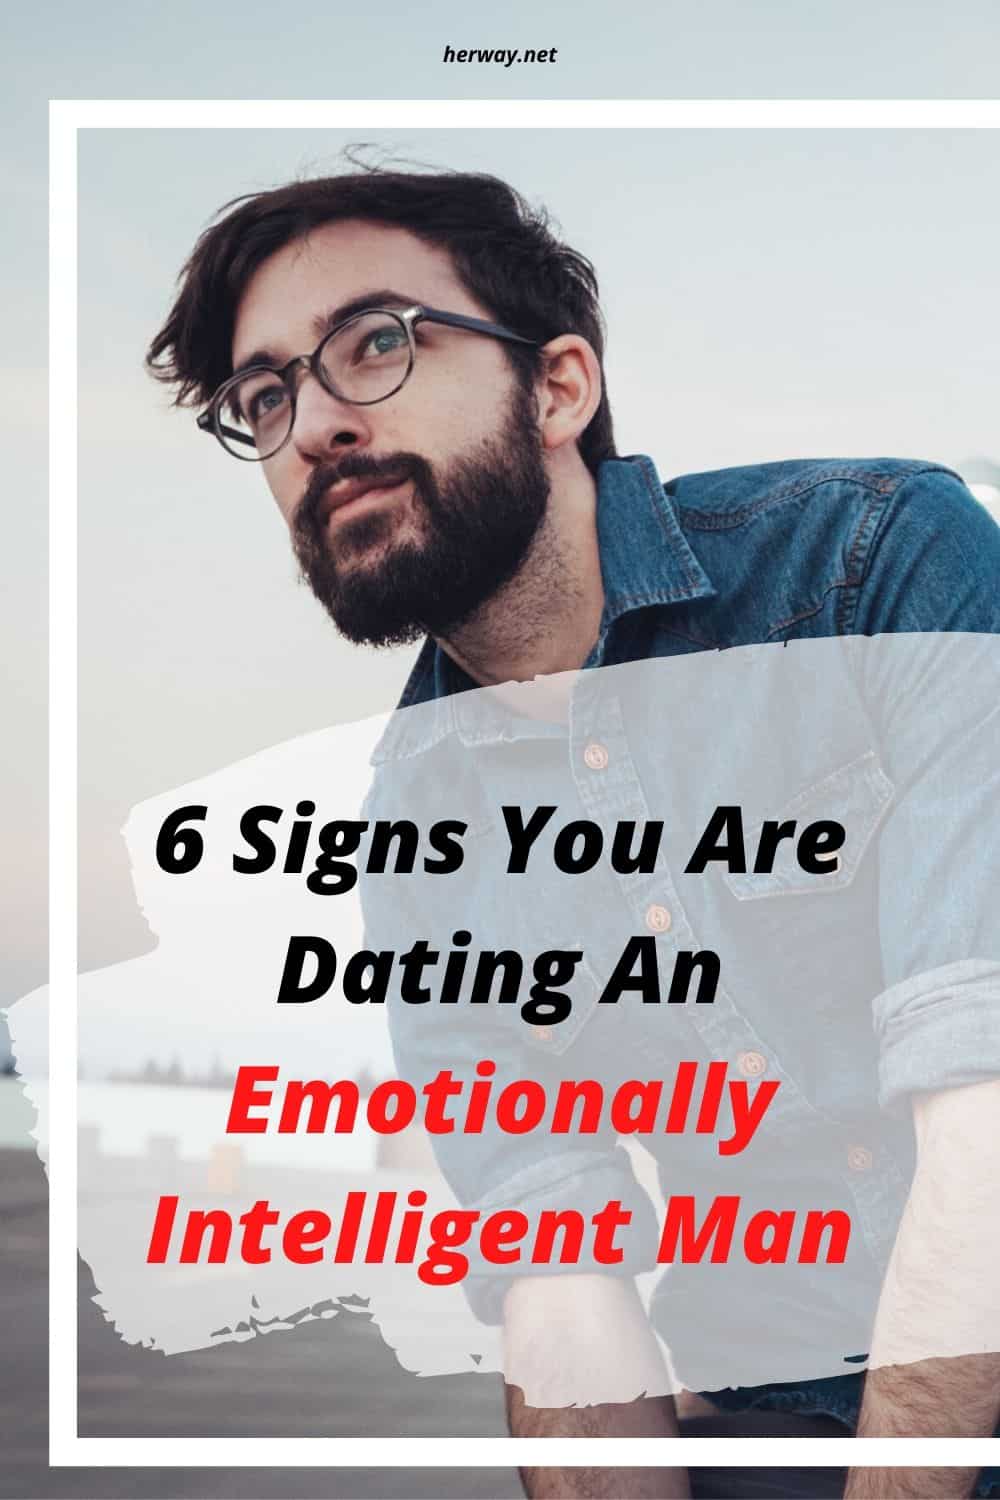 6 Signs You Are Dating An Emotionally Intelligent Man